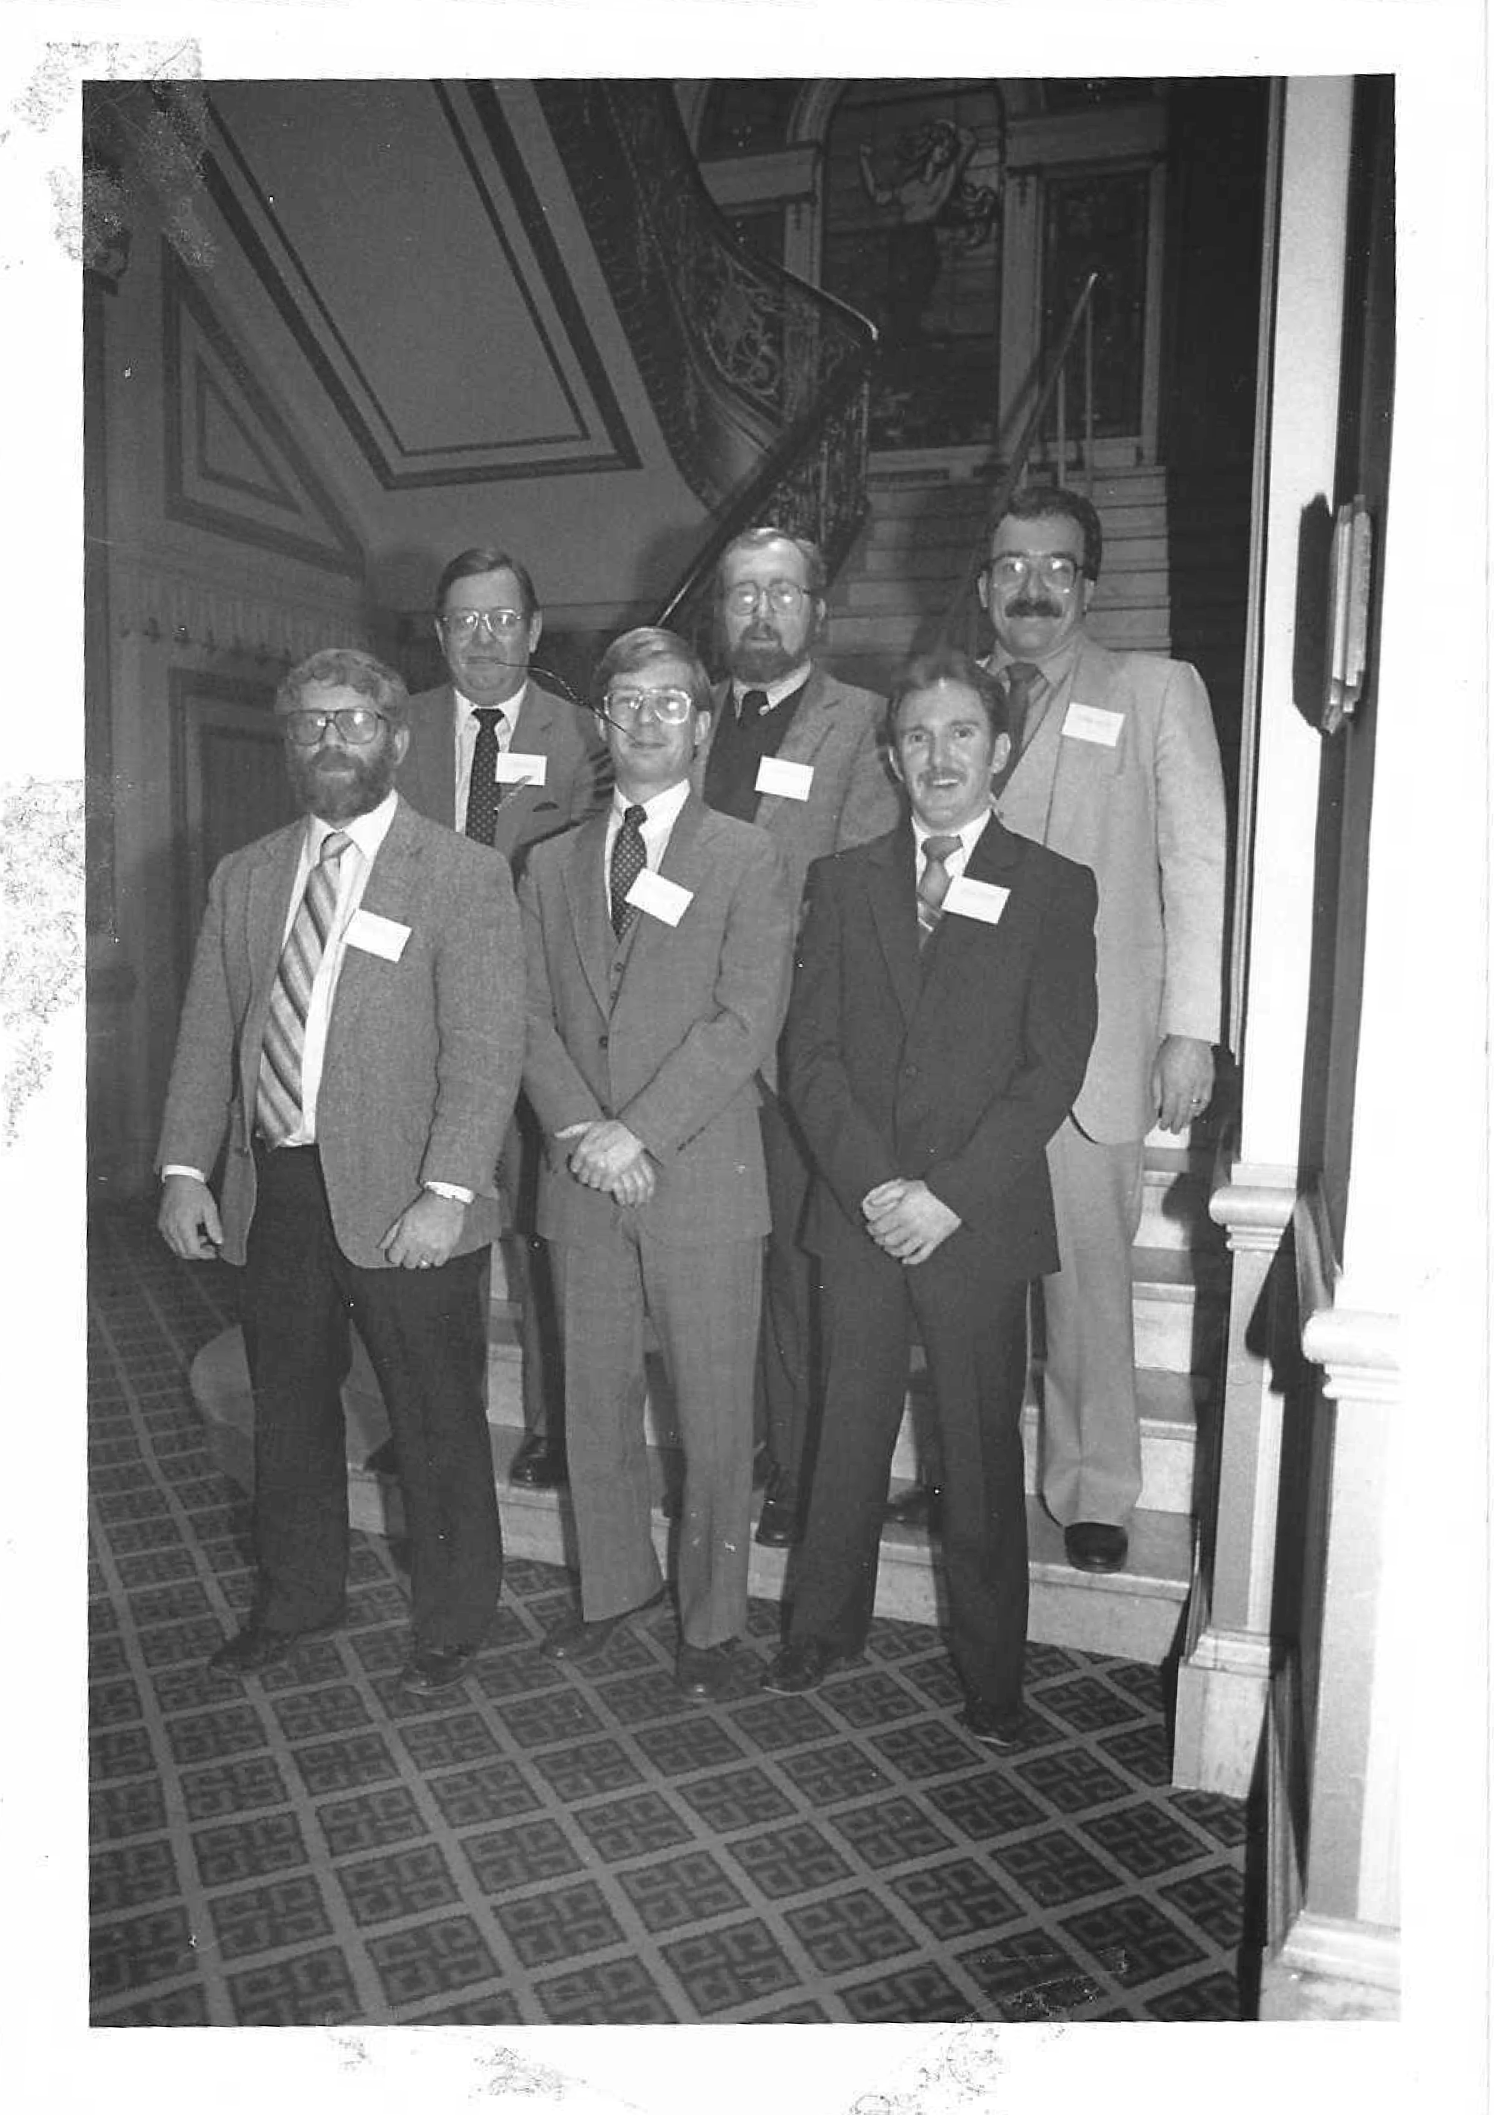 The team from Pleasant Valley School District attending the first LEAP statewide leadership conference at the old Bellevue-Stratford Hotel in the fall of 1985.